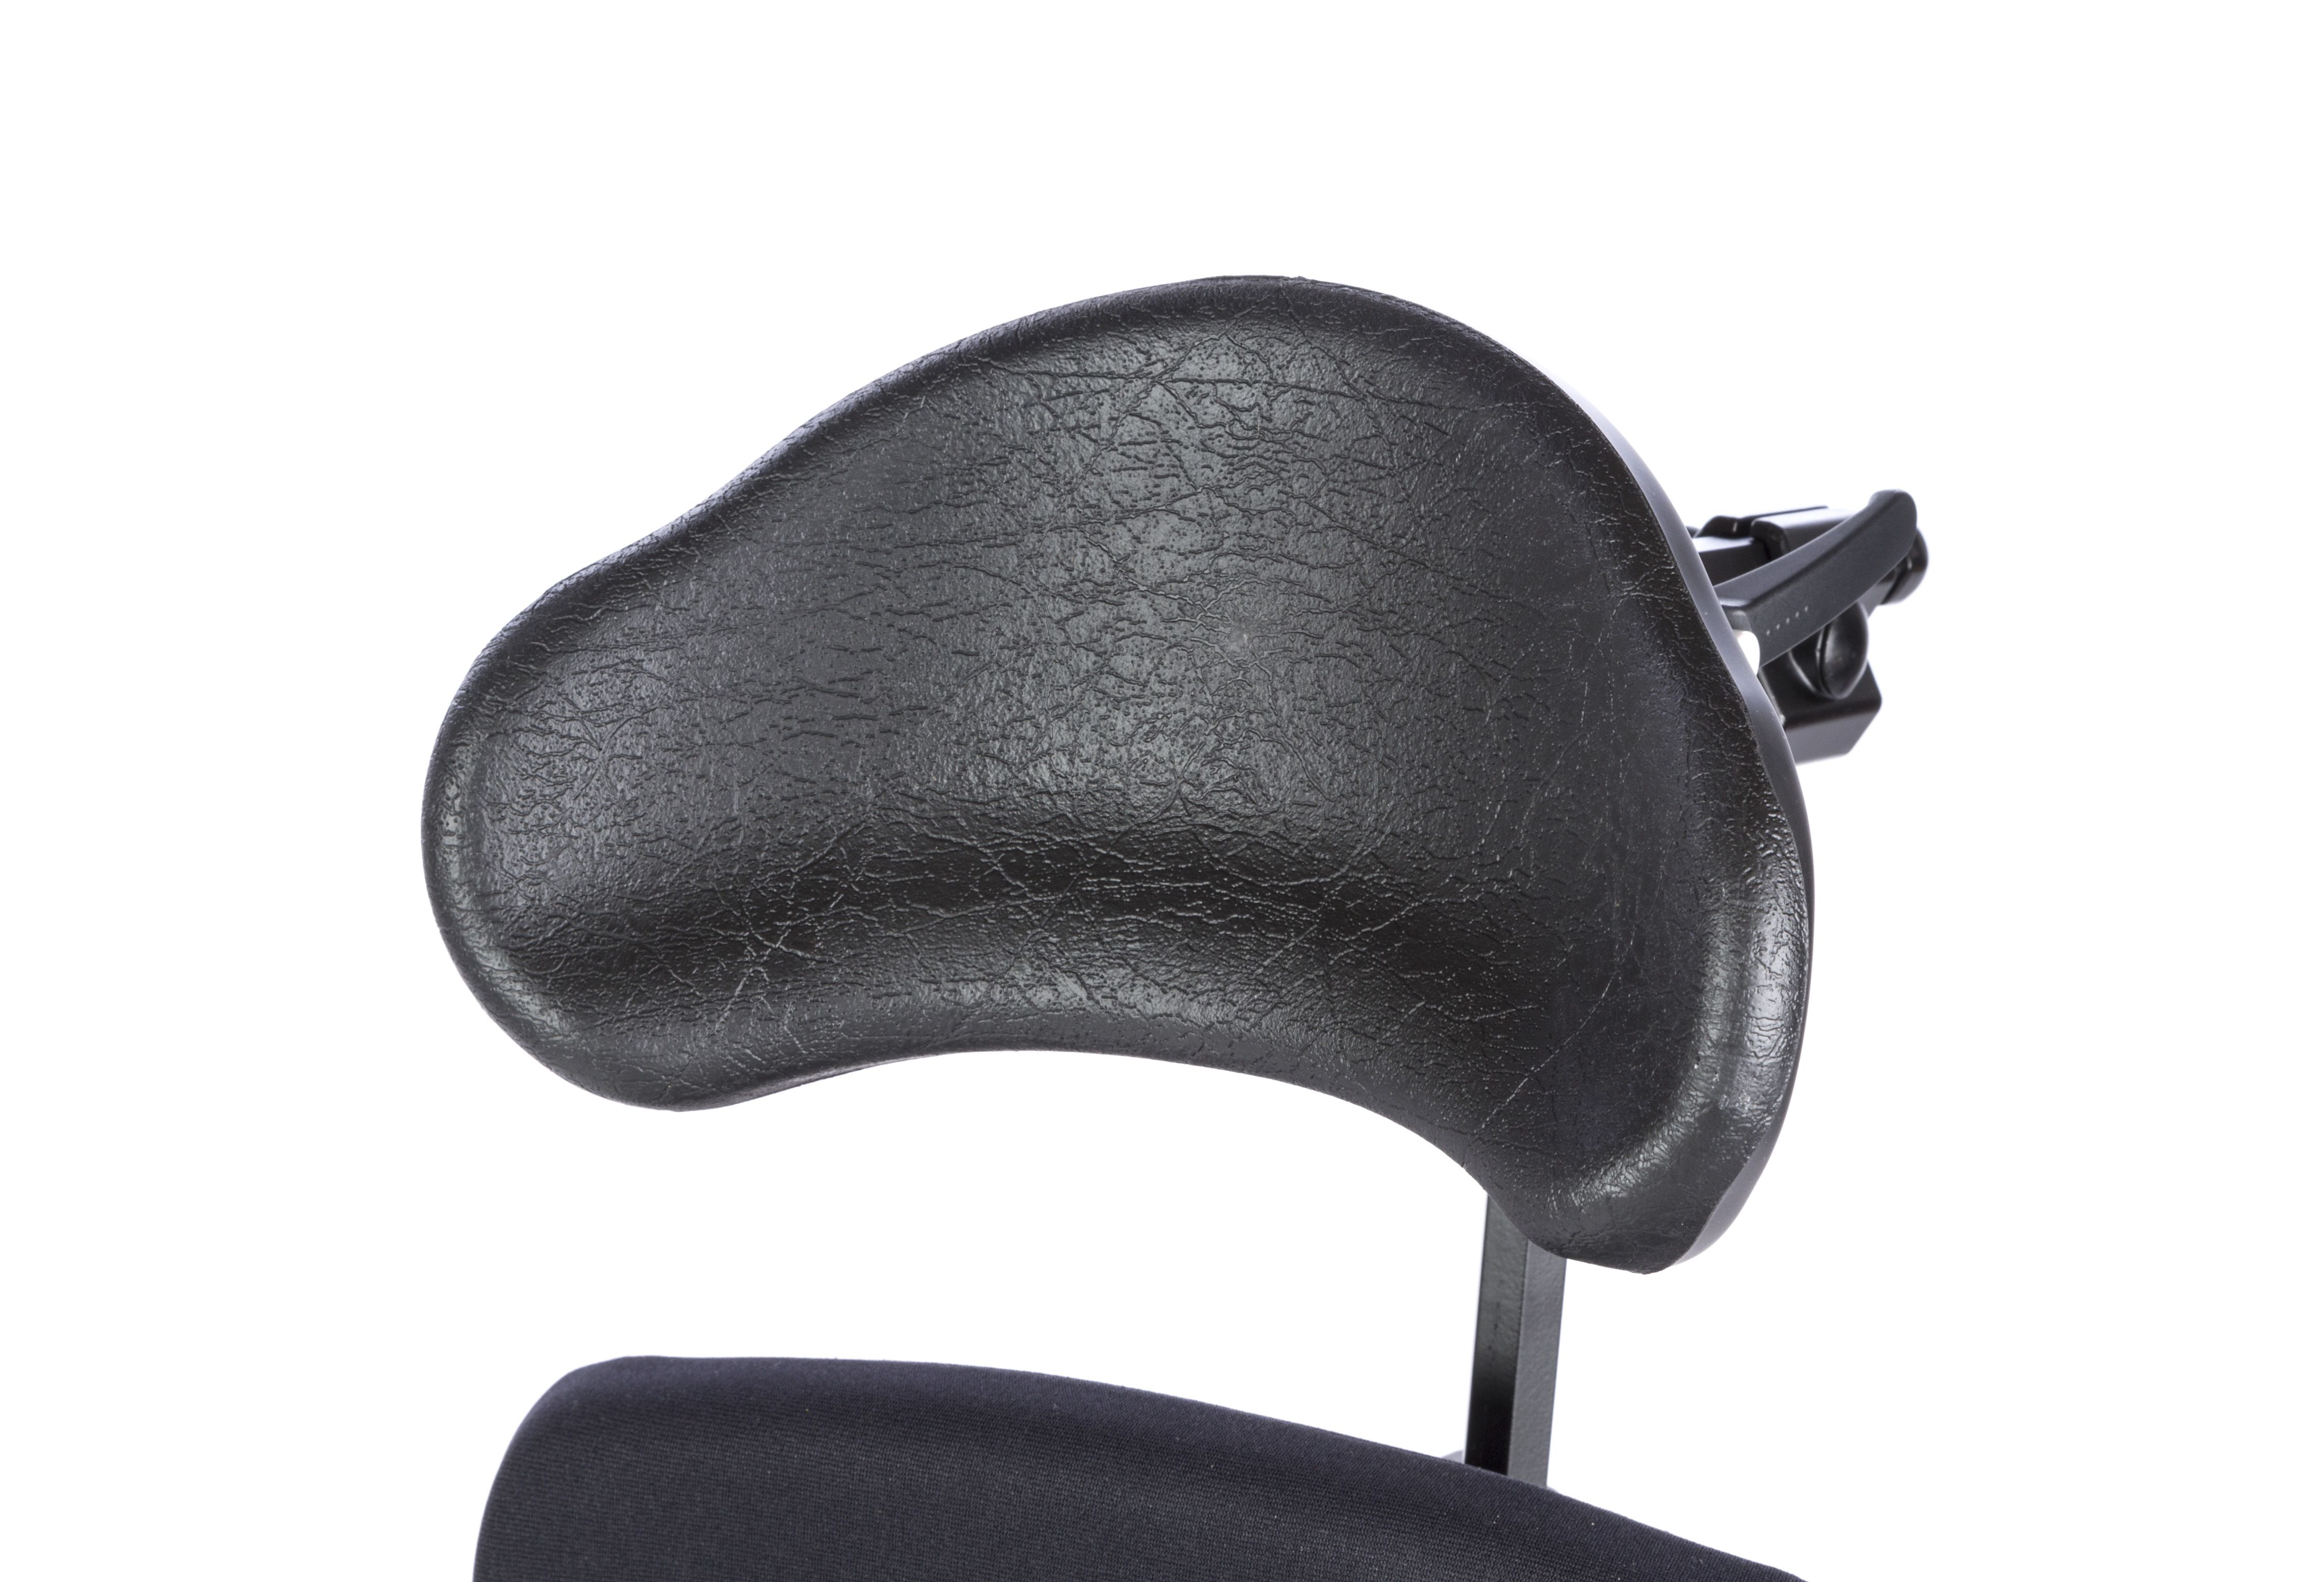 Head Support - 6"H x 10"W